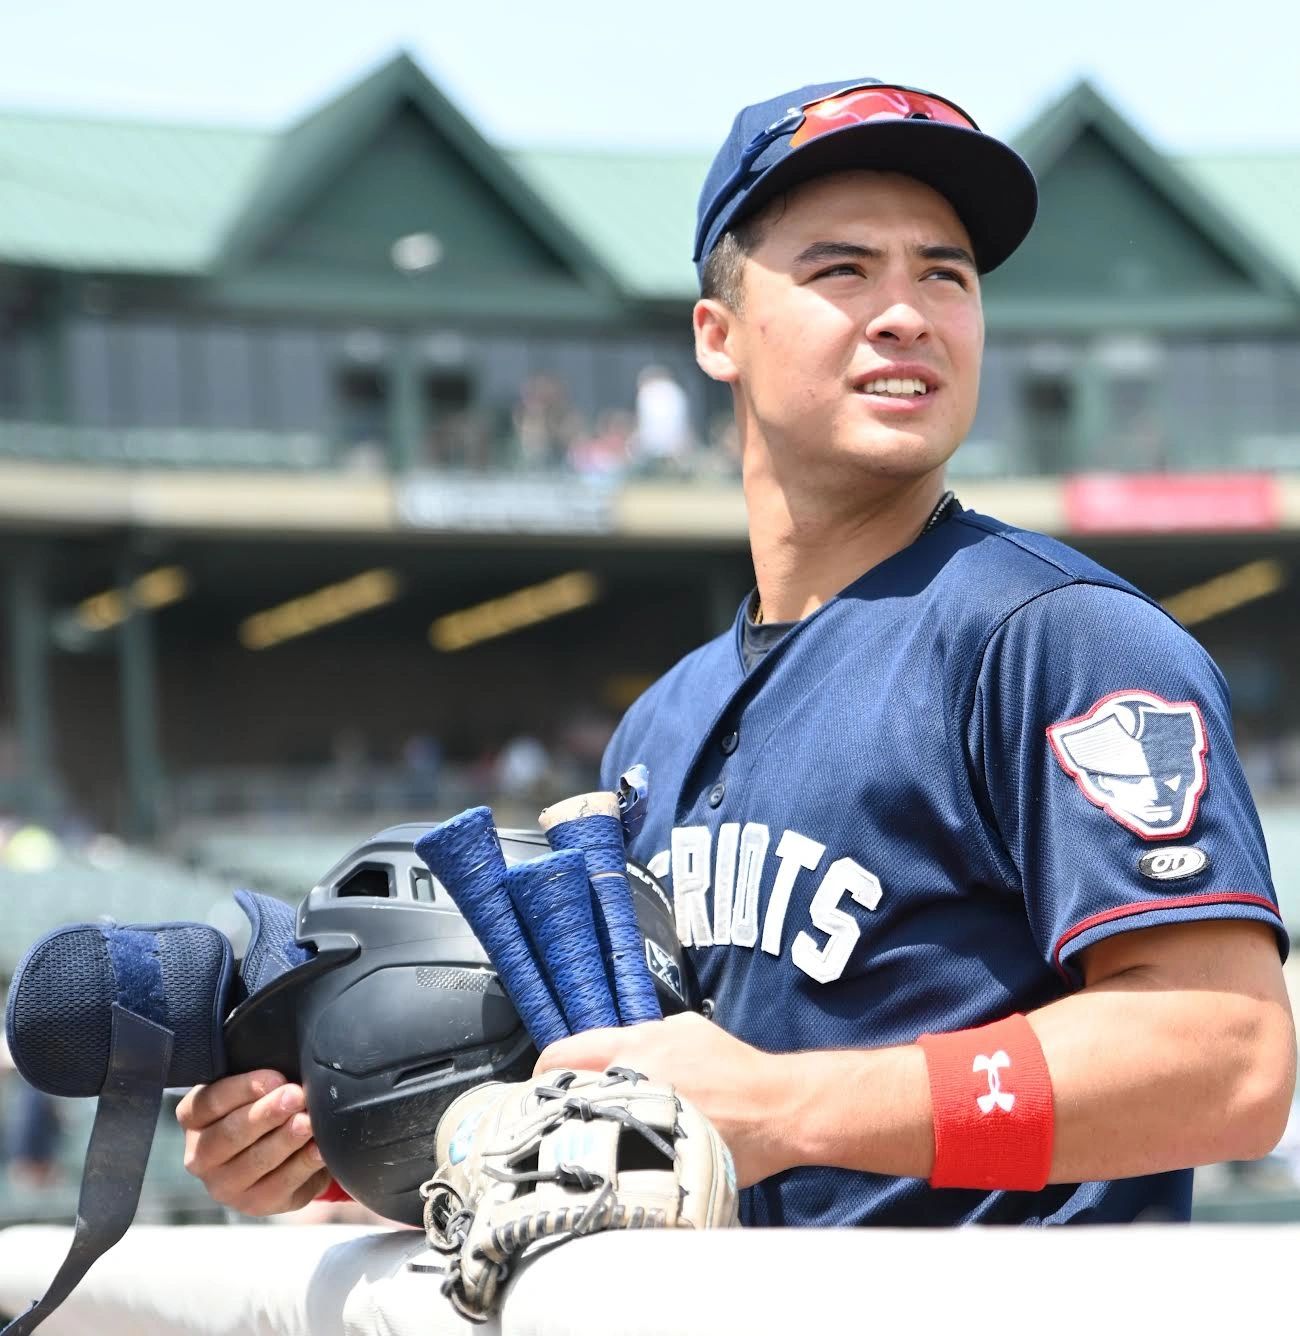 Top Yankees Prospect Oswald Peraza Promoted to Somerset Patriots